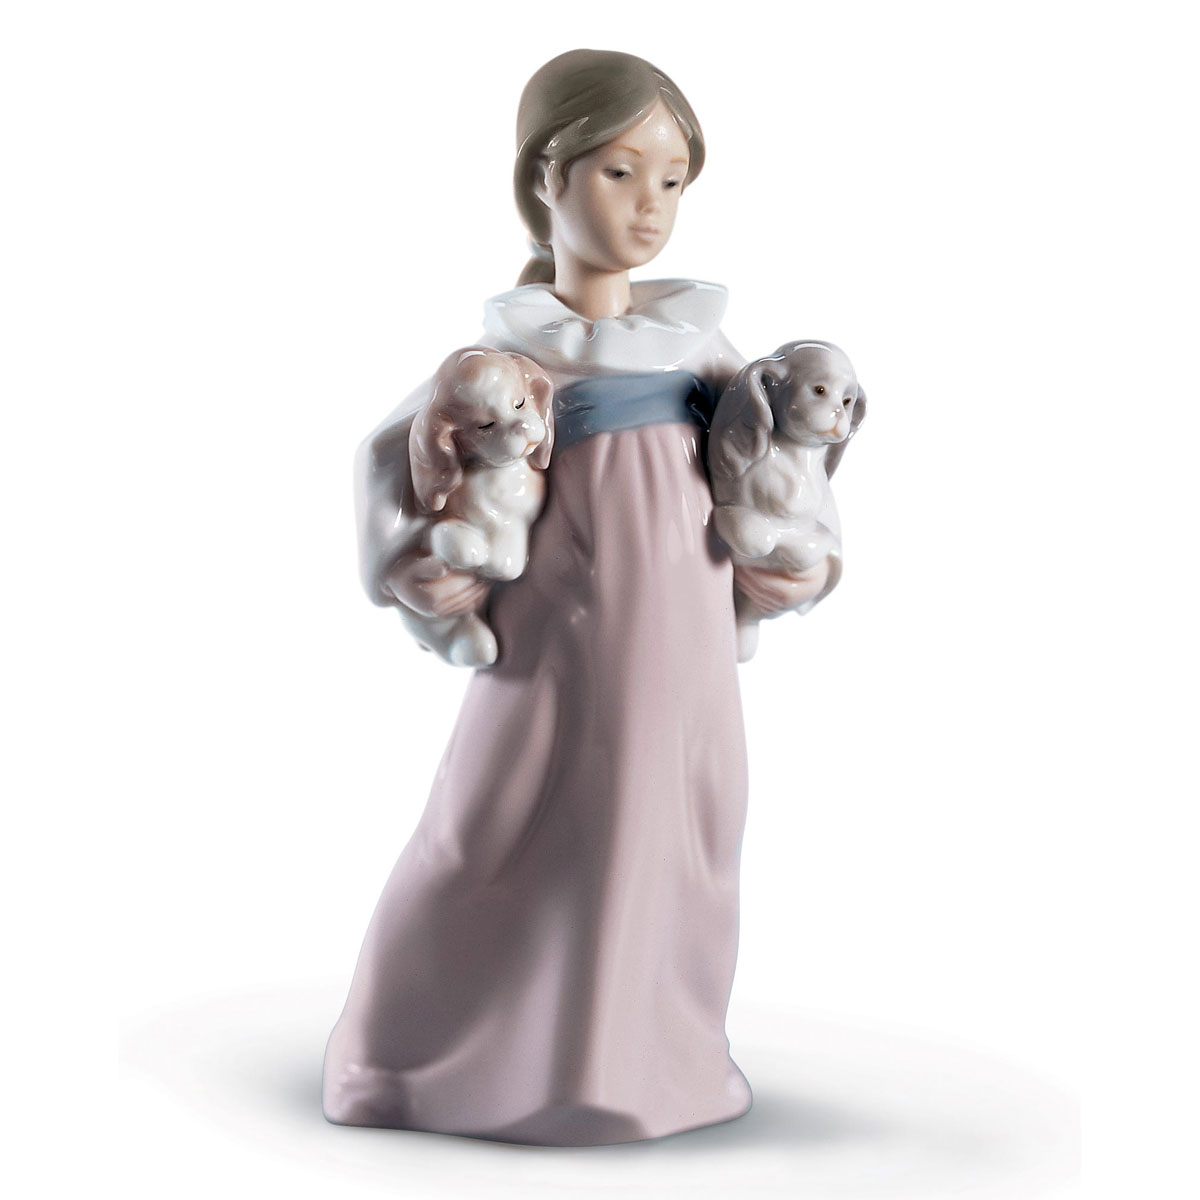 Lladro Classic Sculpture, Arms Full Of Love Girl Figurine